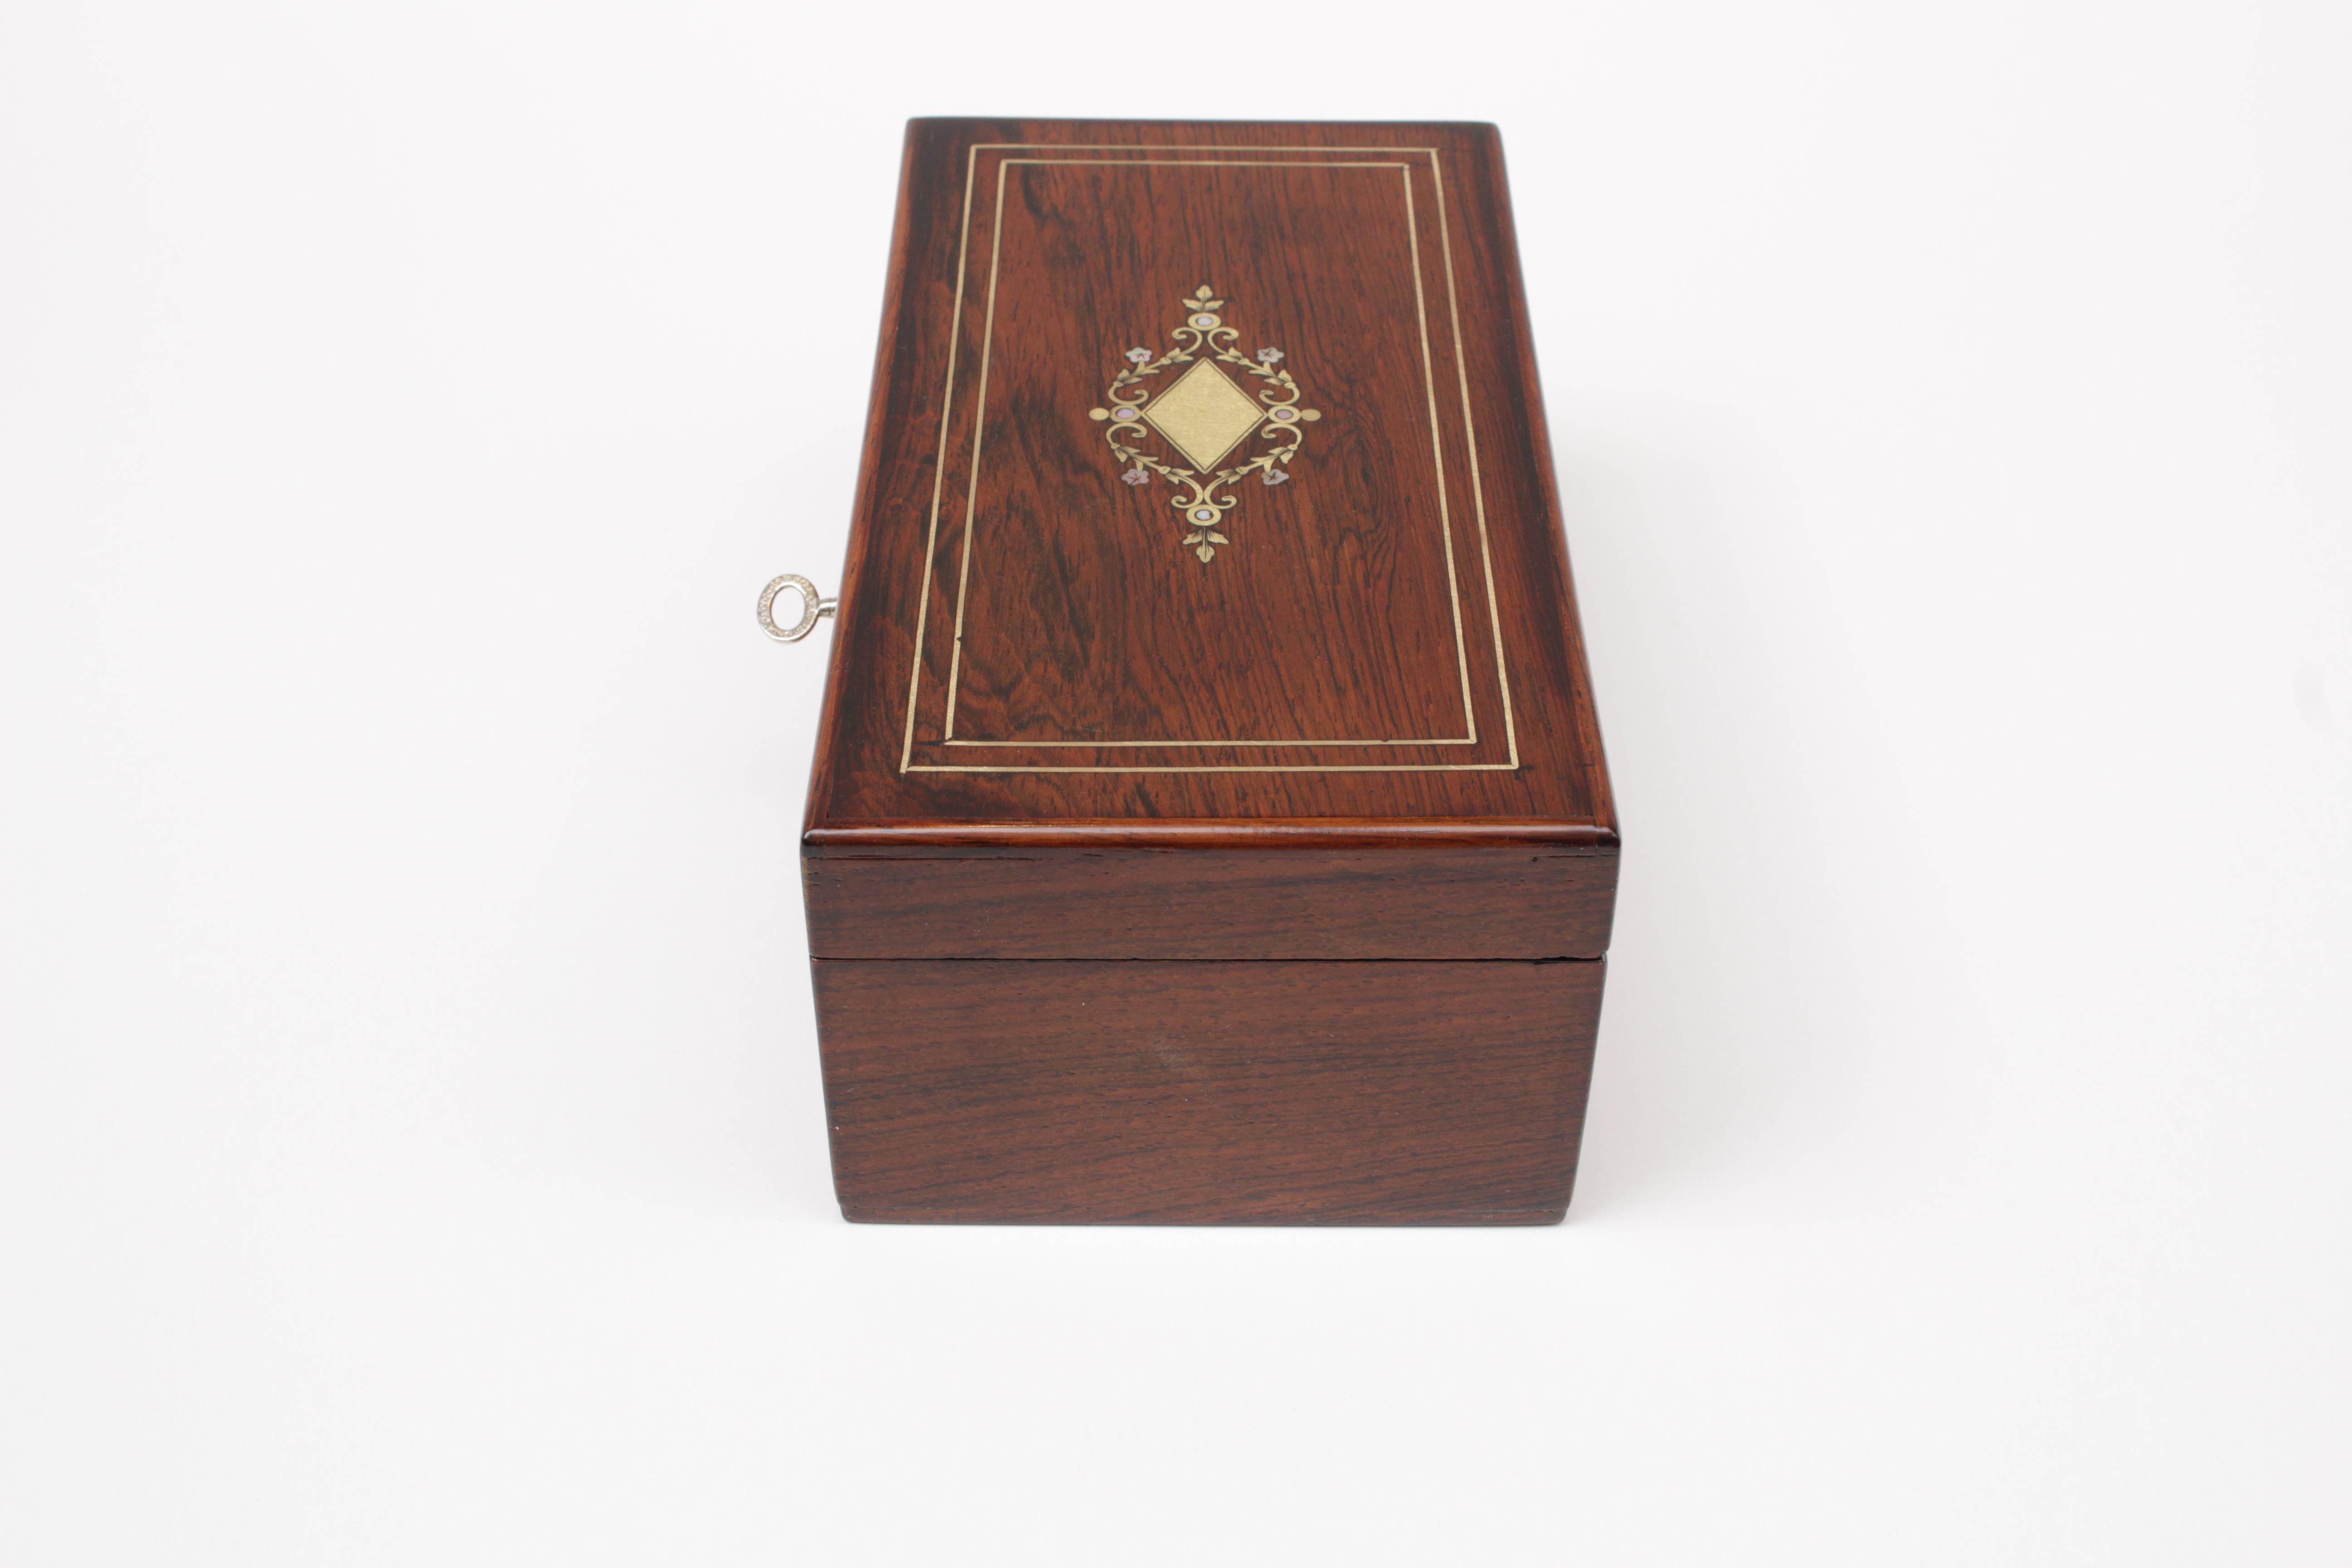 Very beautiful small box from the time of Art Nouveau, made of jacaranda and brass inserts. The box is with interior division. In very good restored condition.